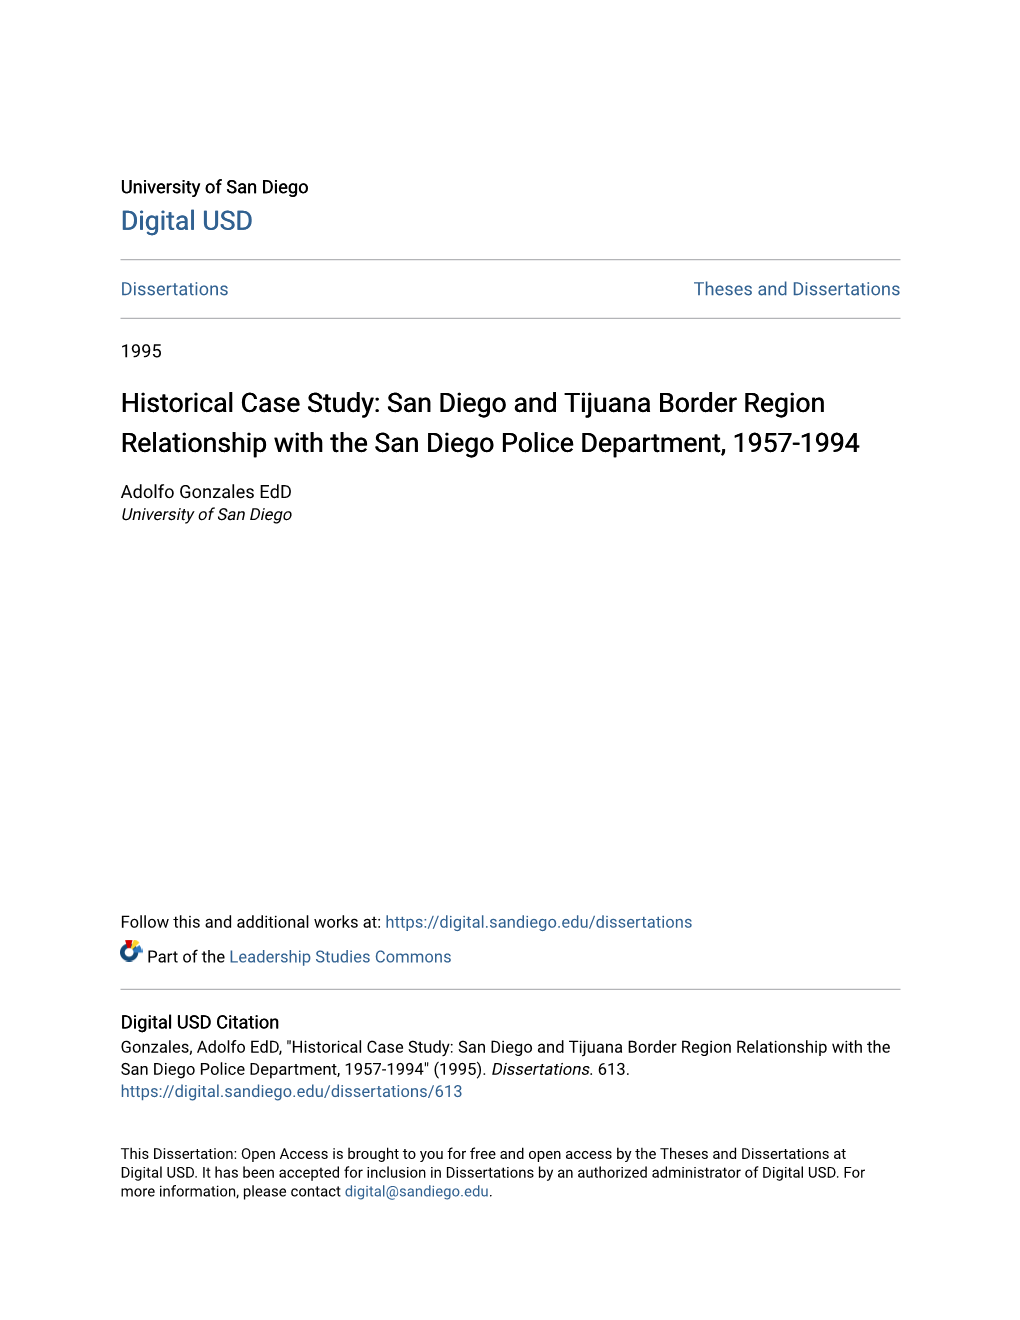 Historical Case Study: San Diego and Tijuana Border Region Relationship with the San Diego Police Department, 1957-1994